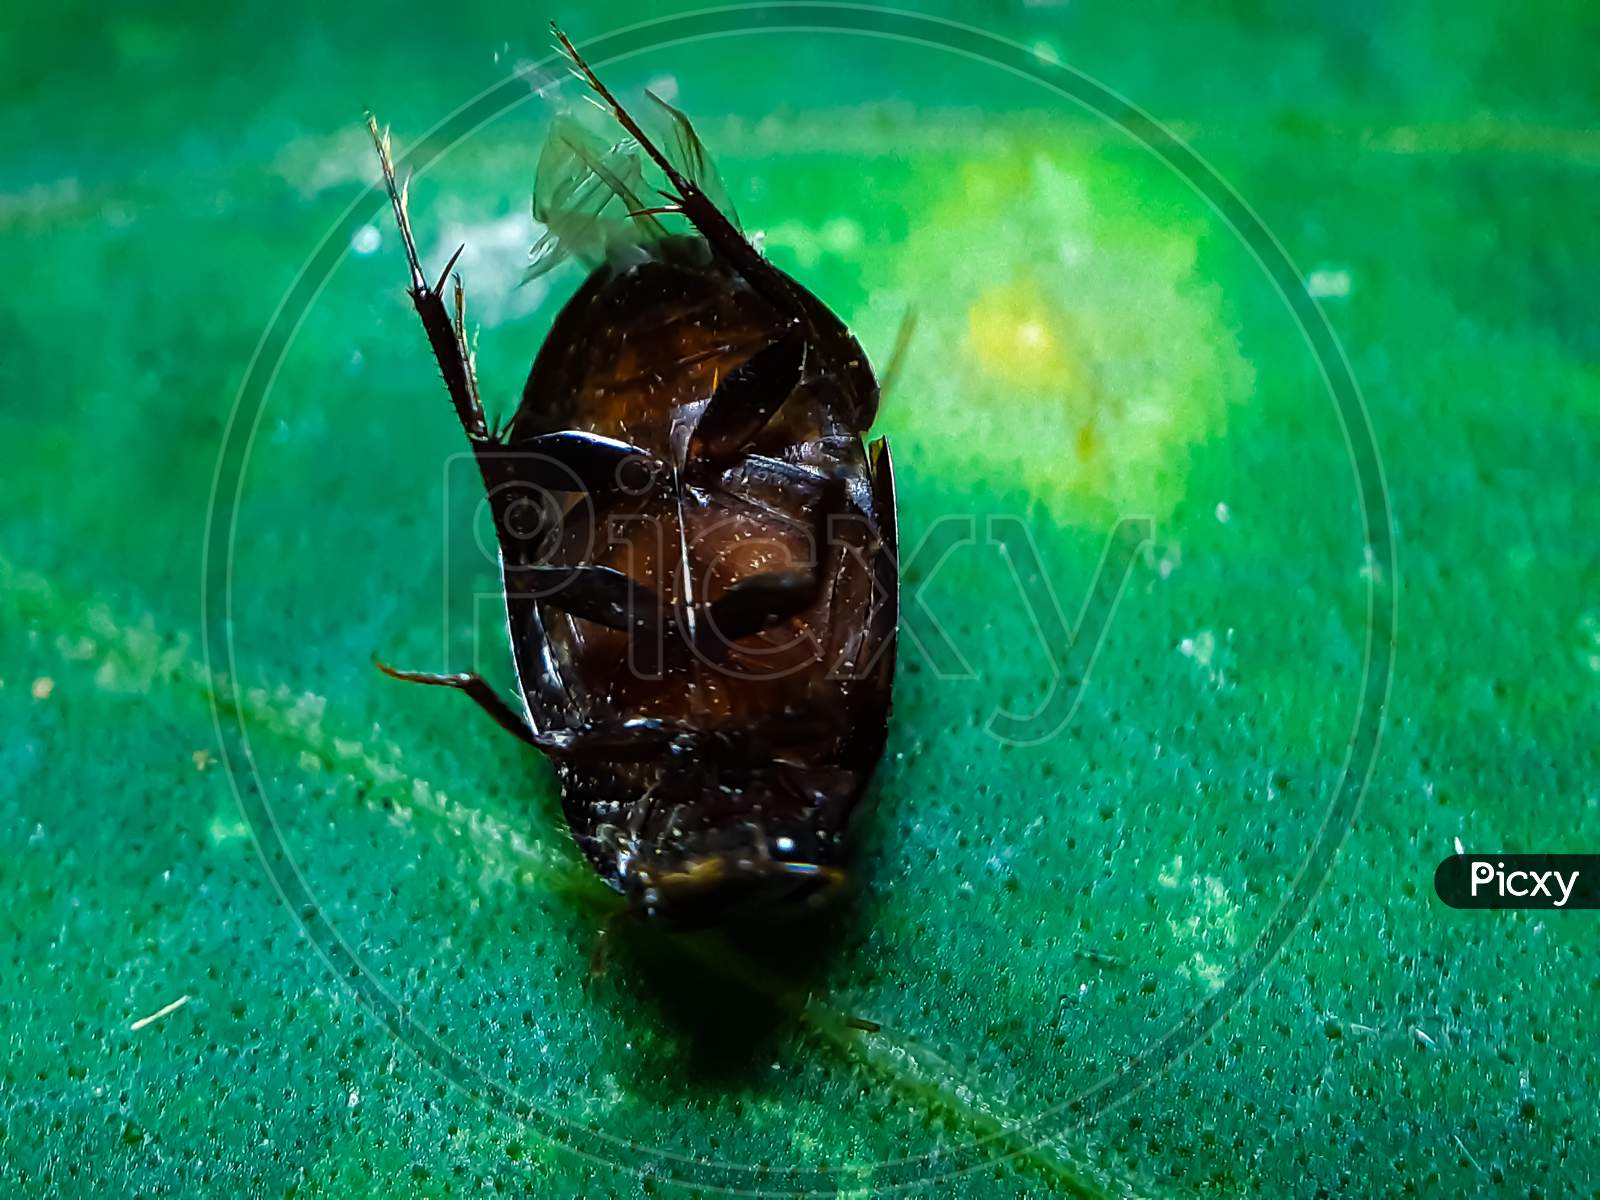 A Black Cockroach Is Lying Dead On The Green Leaves And Has A Green Background.